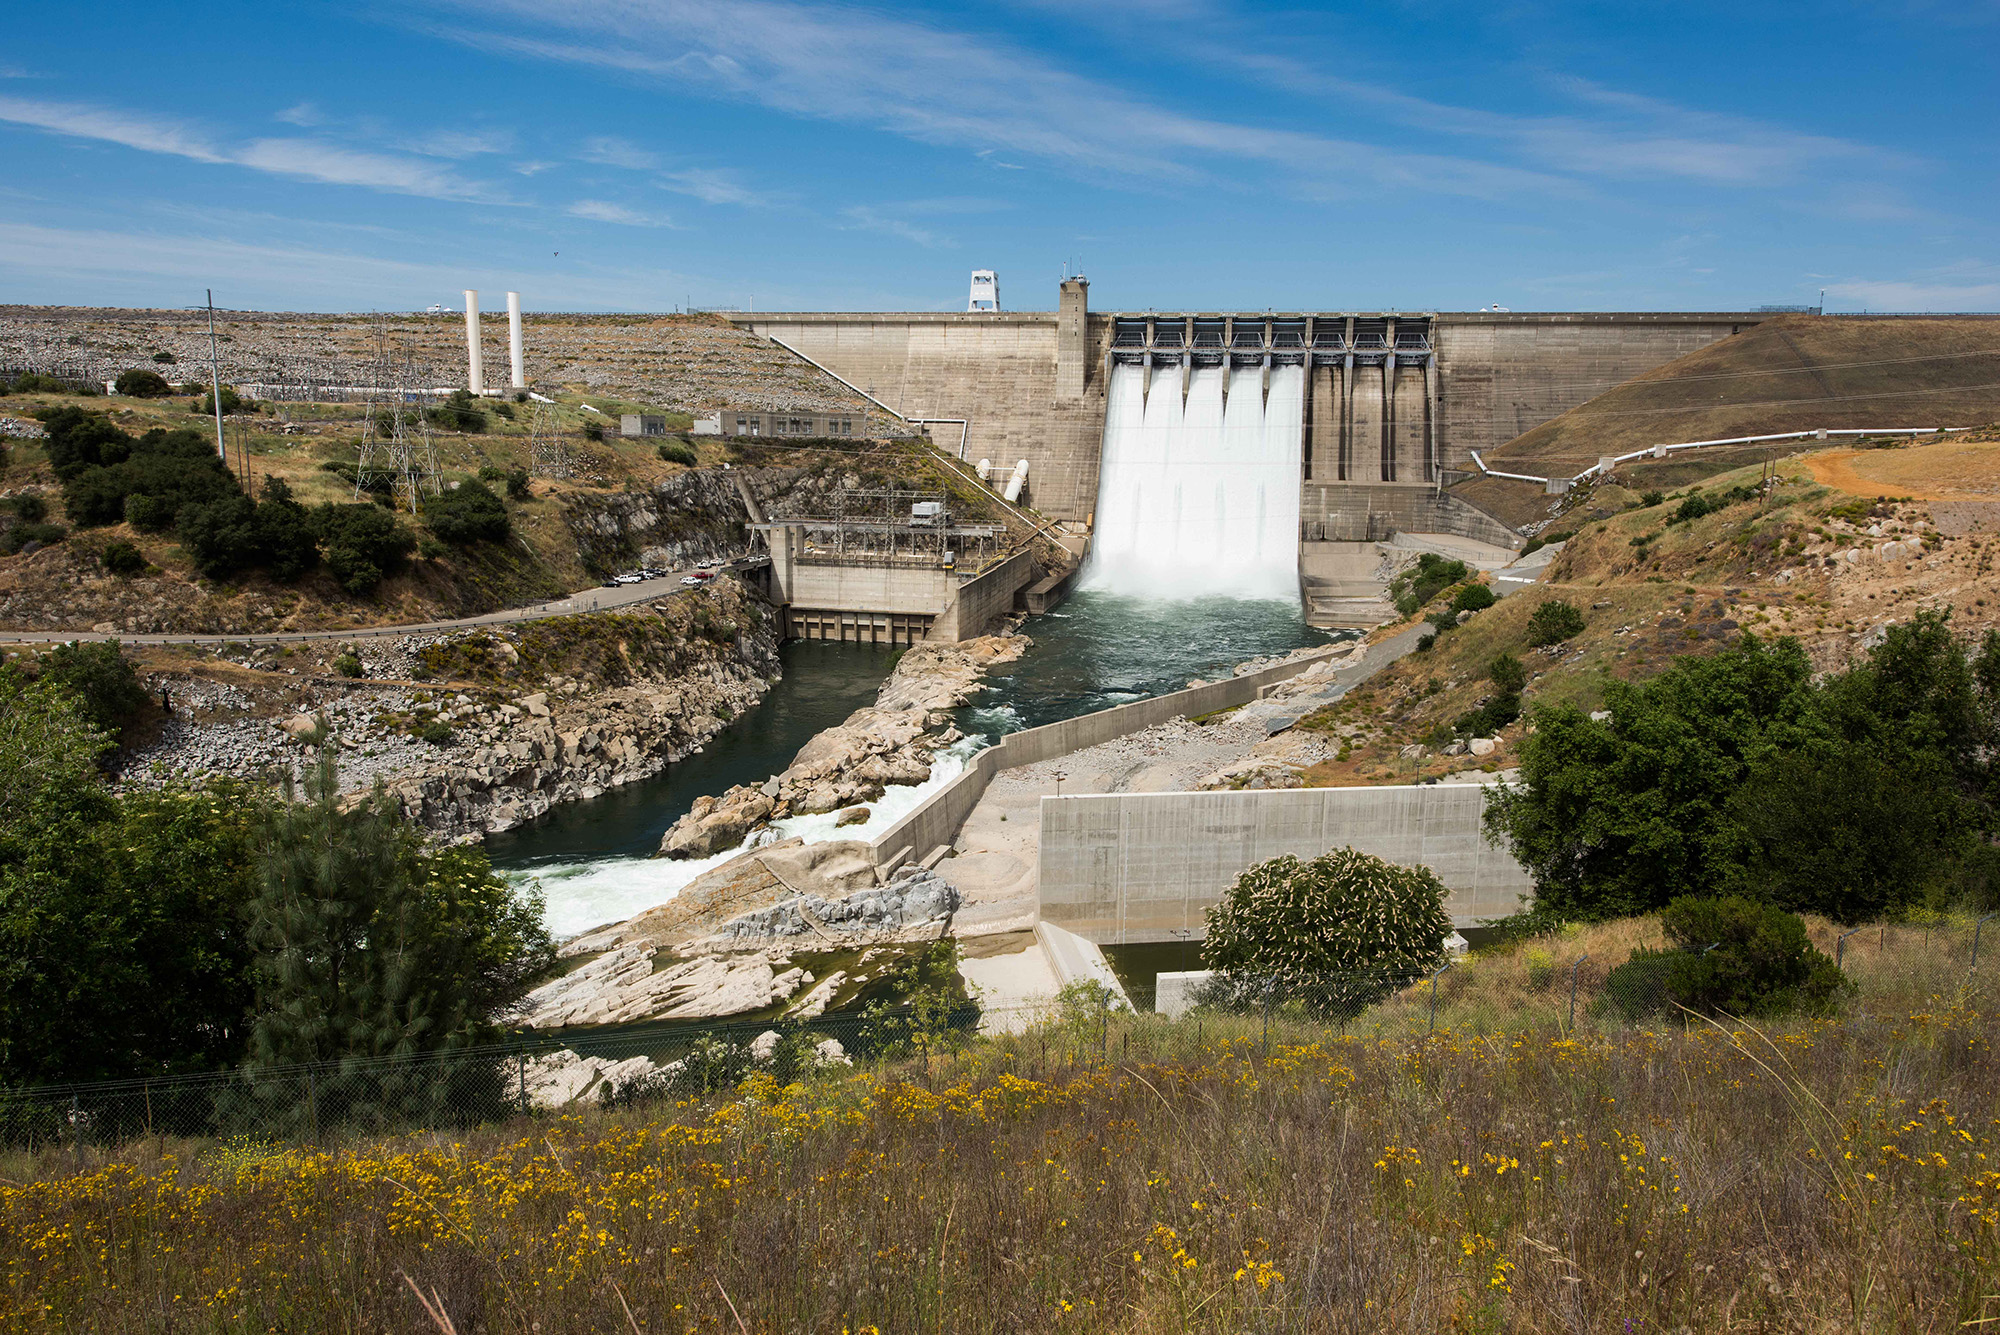 Folsom Dam was one of the facilities receiving funding. It received $20.5 million for three different projects.